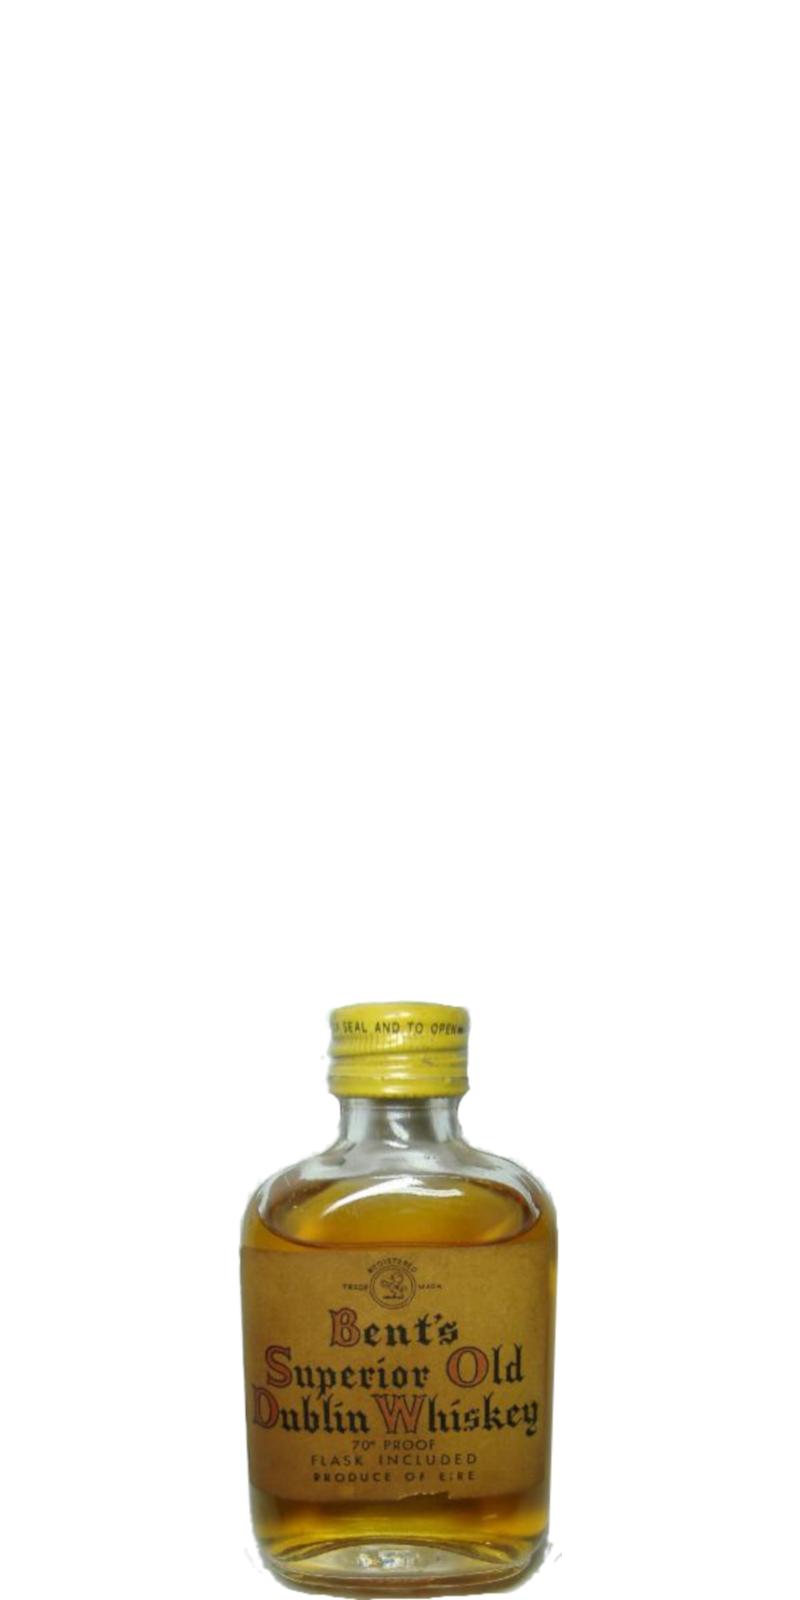 Bent's Superior Old Dublin Whiskey